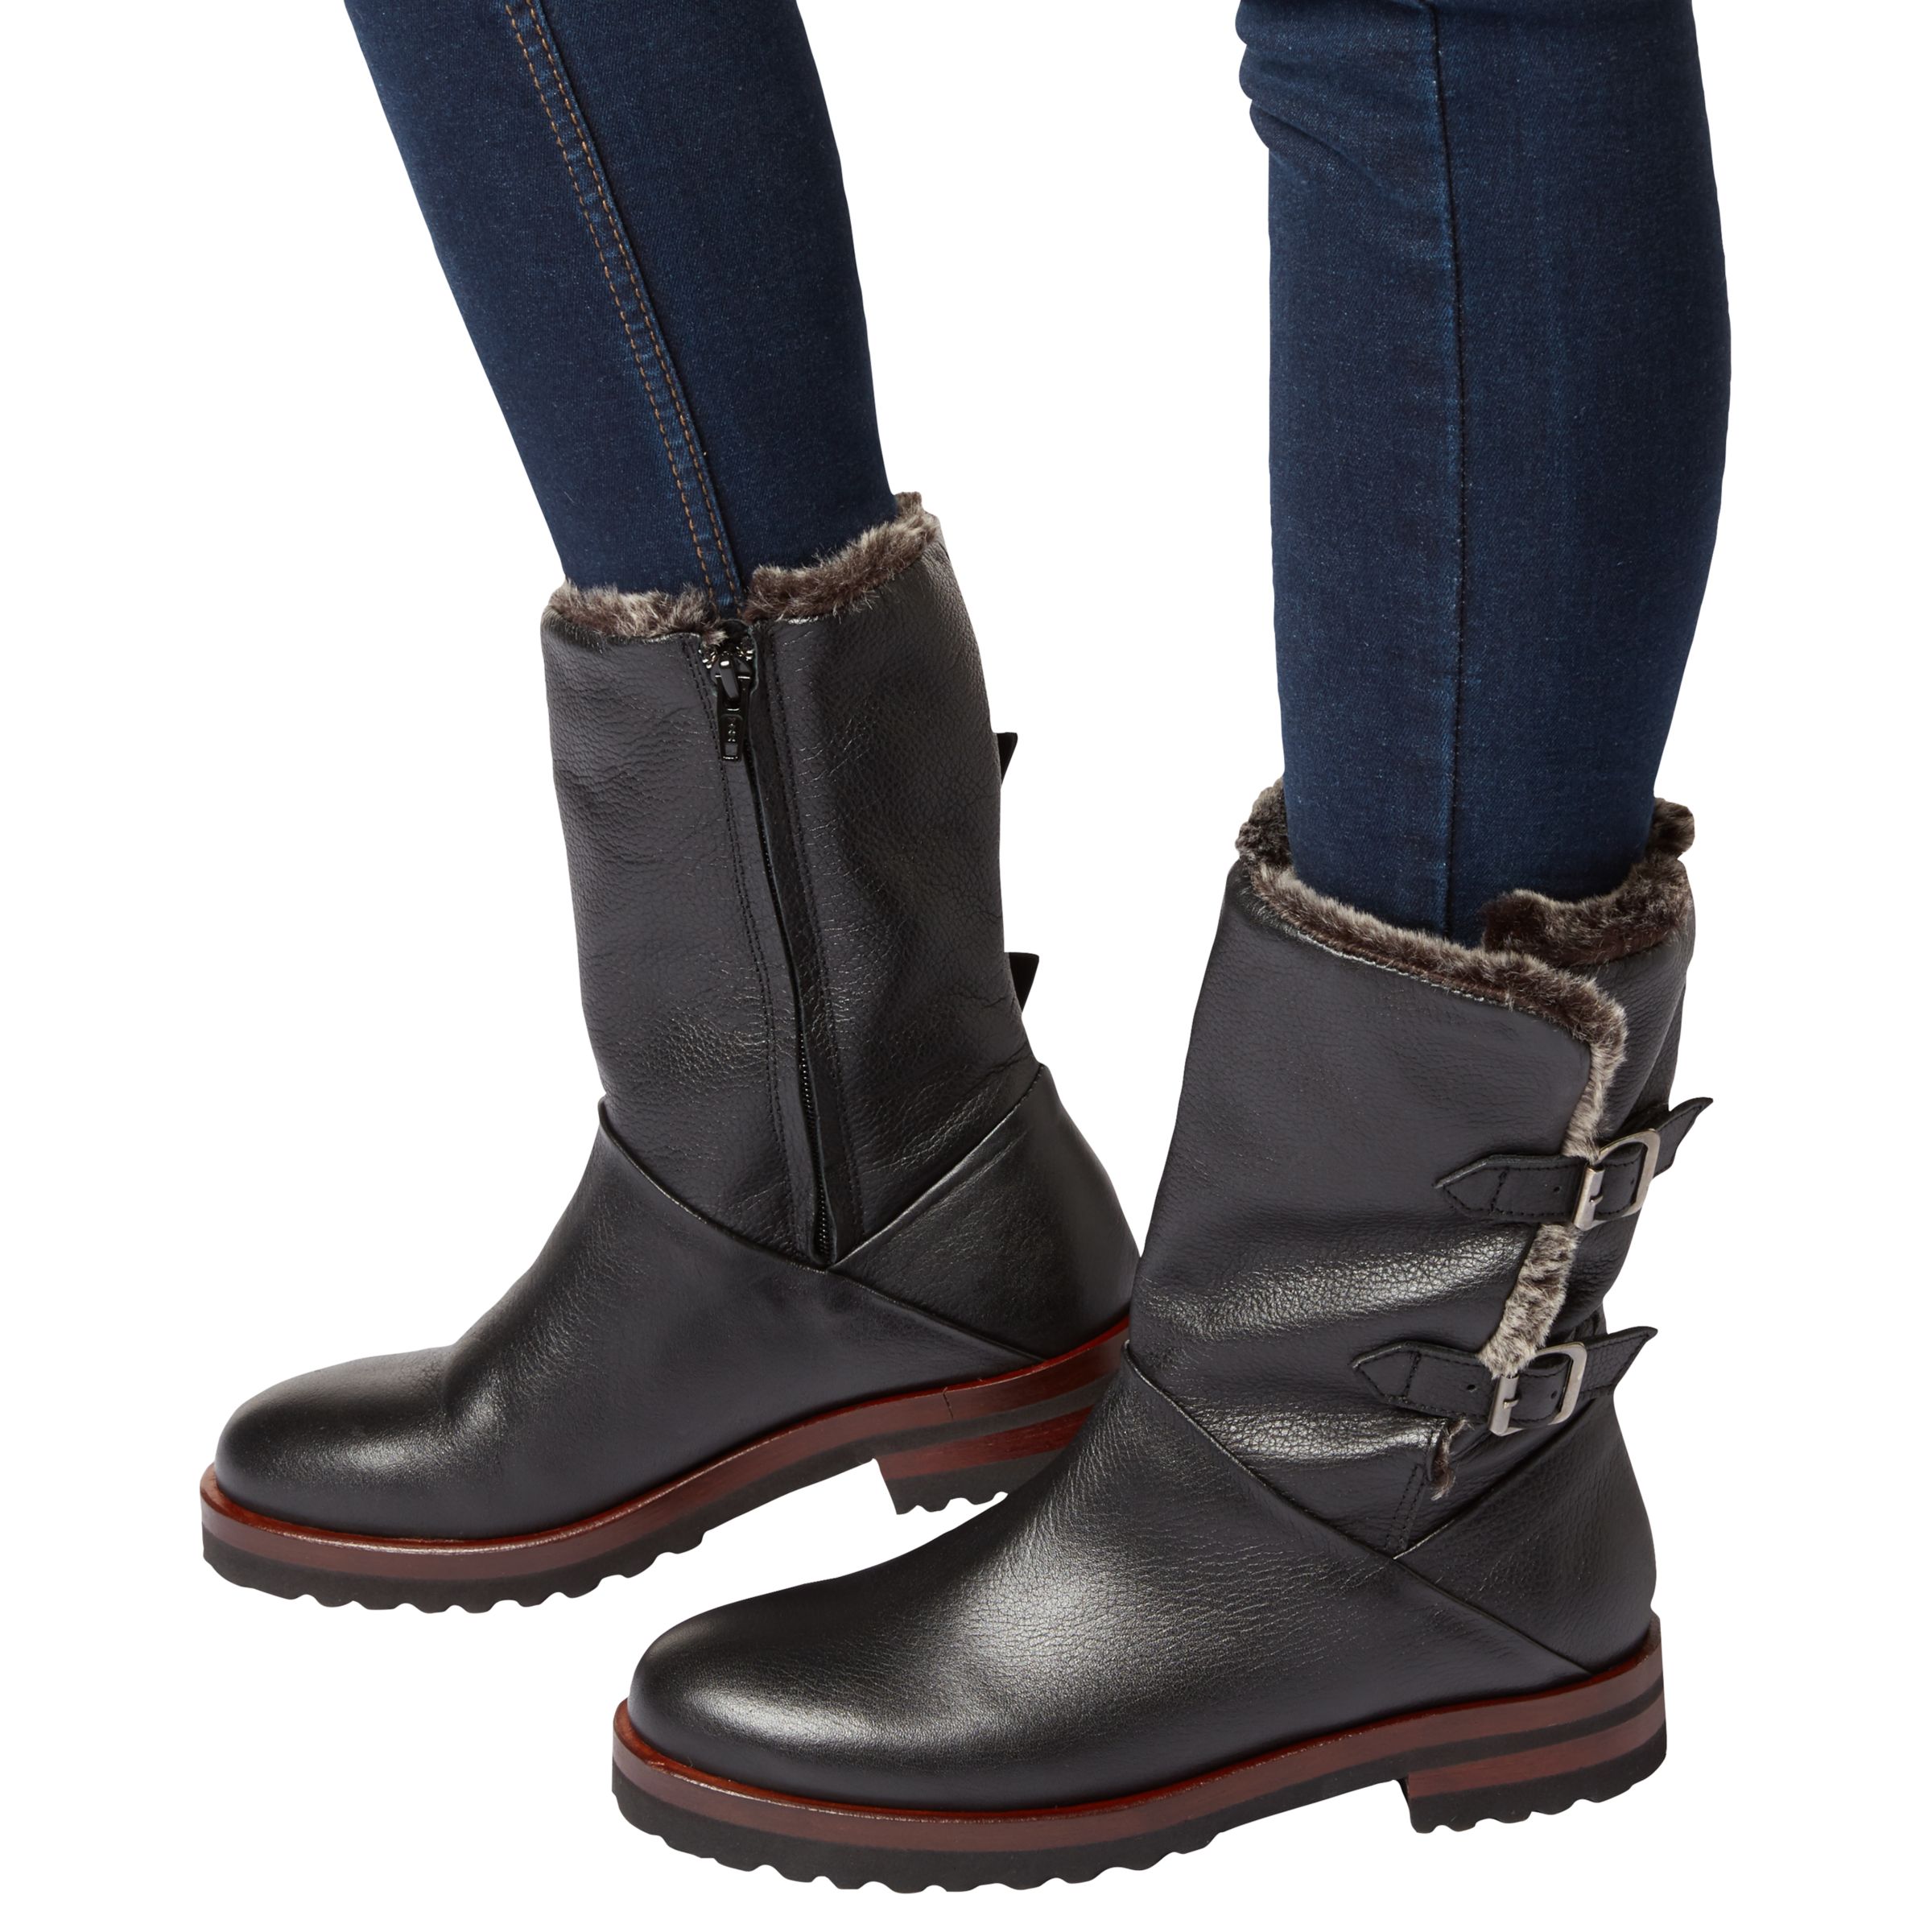 chunky boots asos